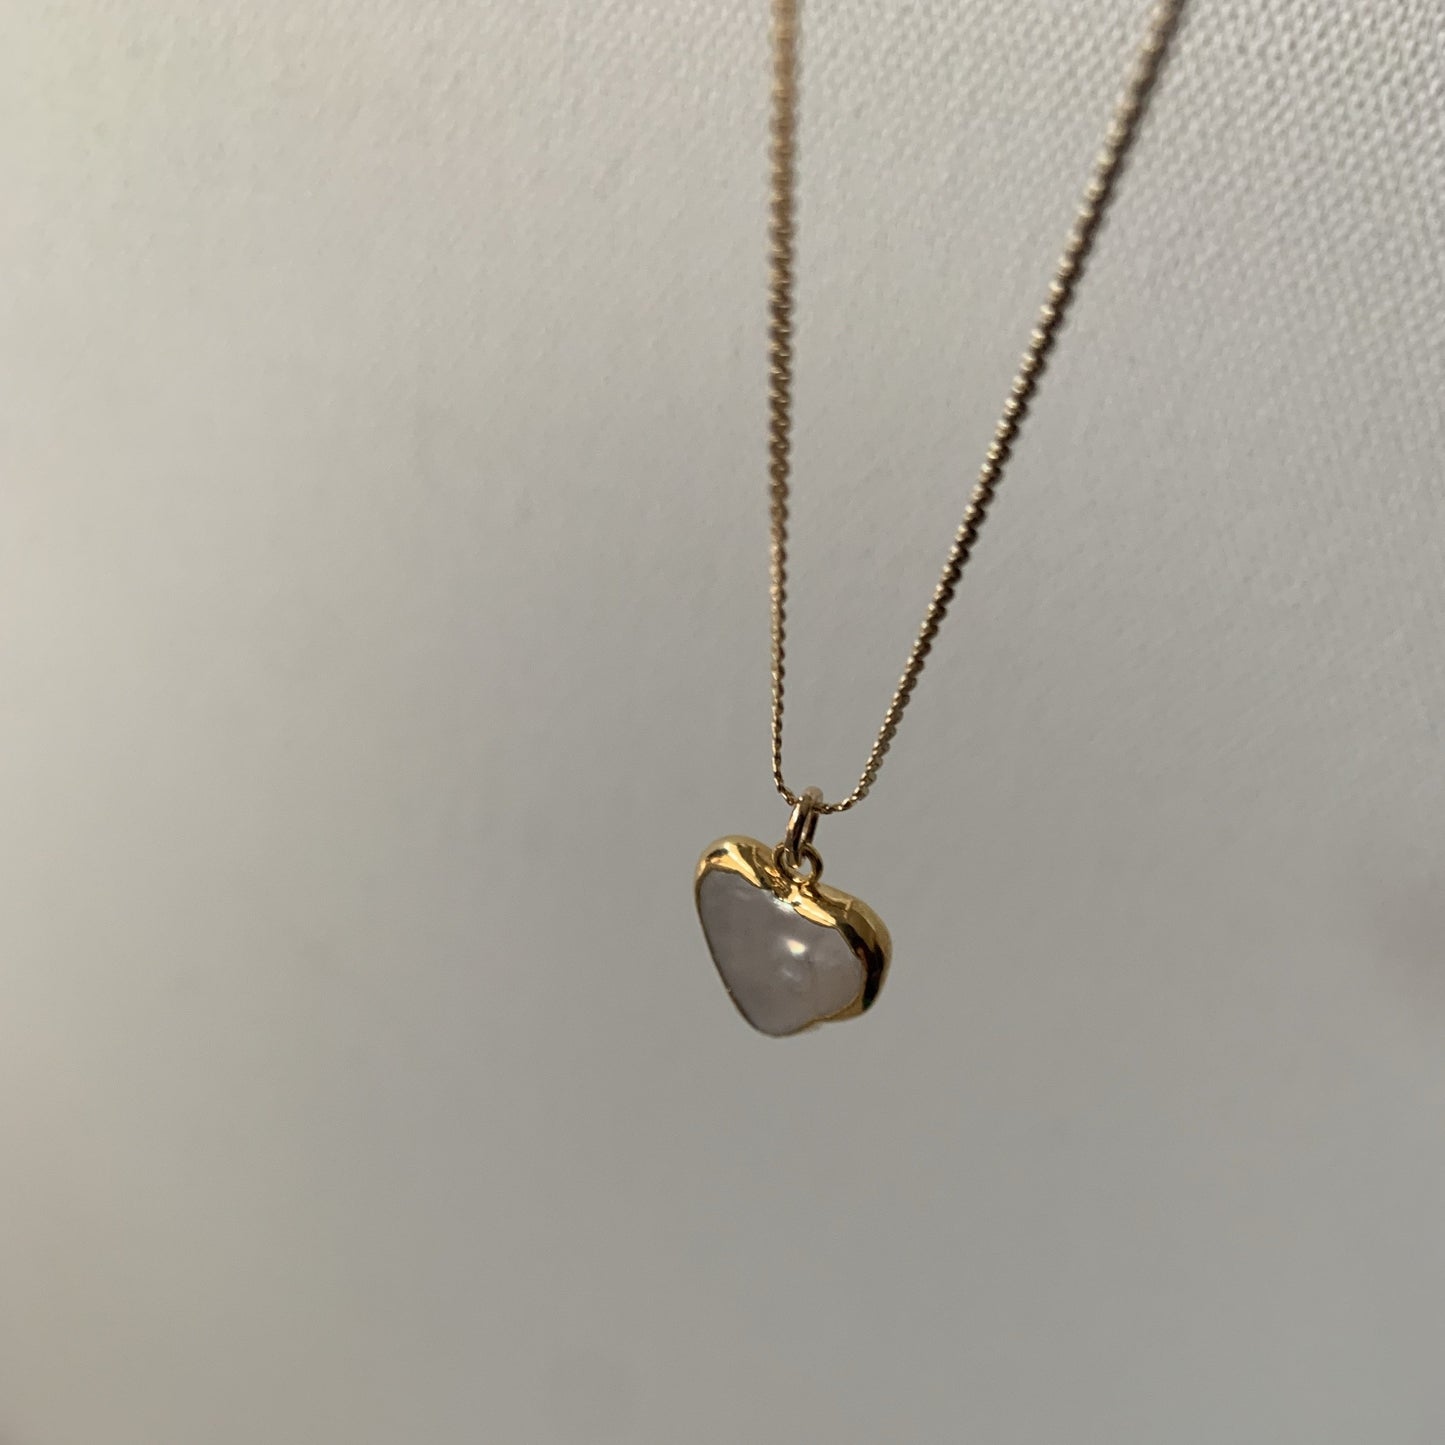 Stone Cooper Pearl heart necklace